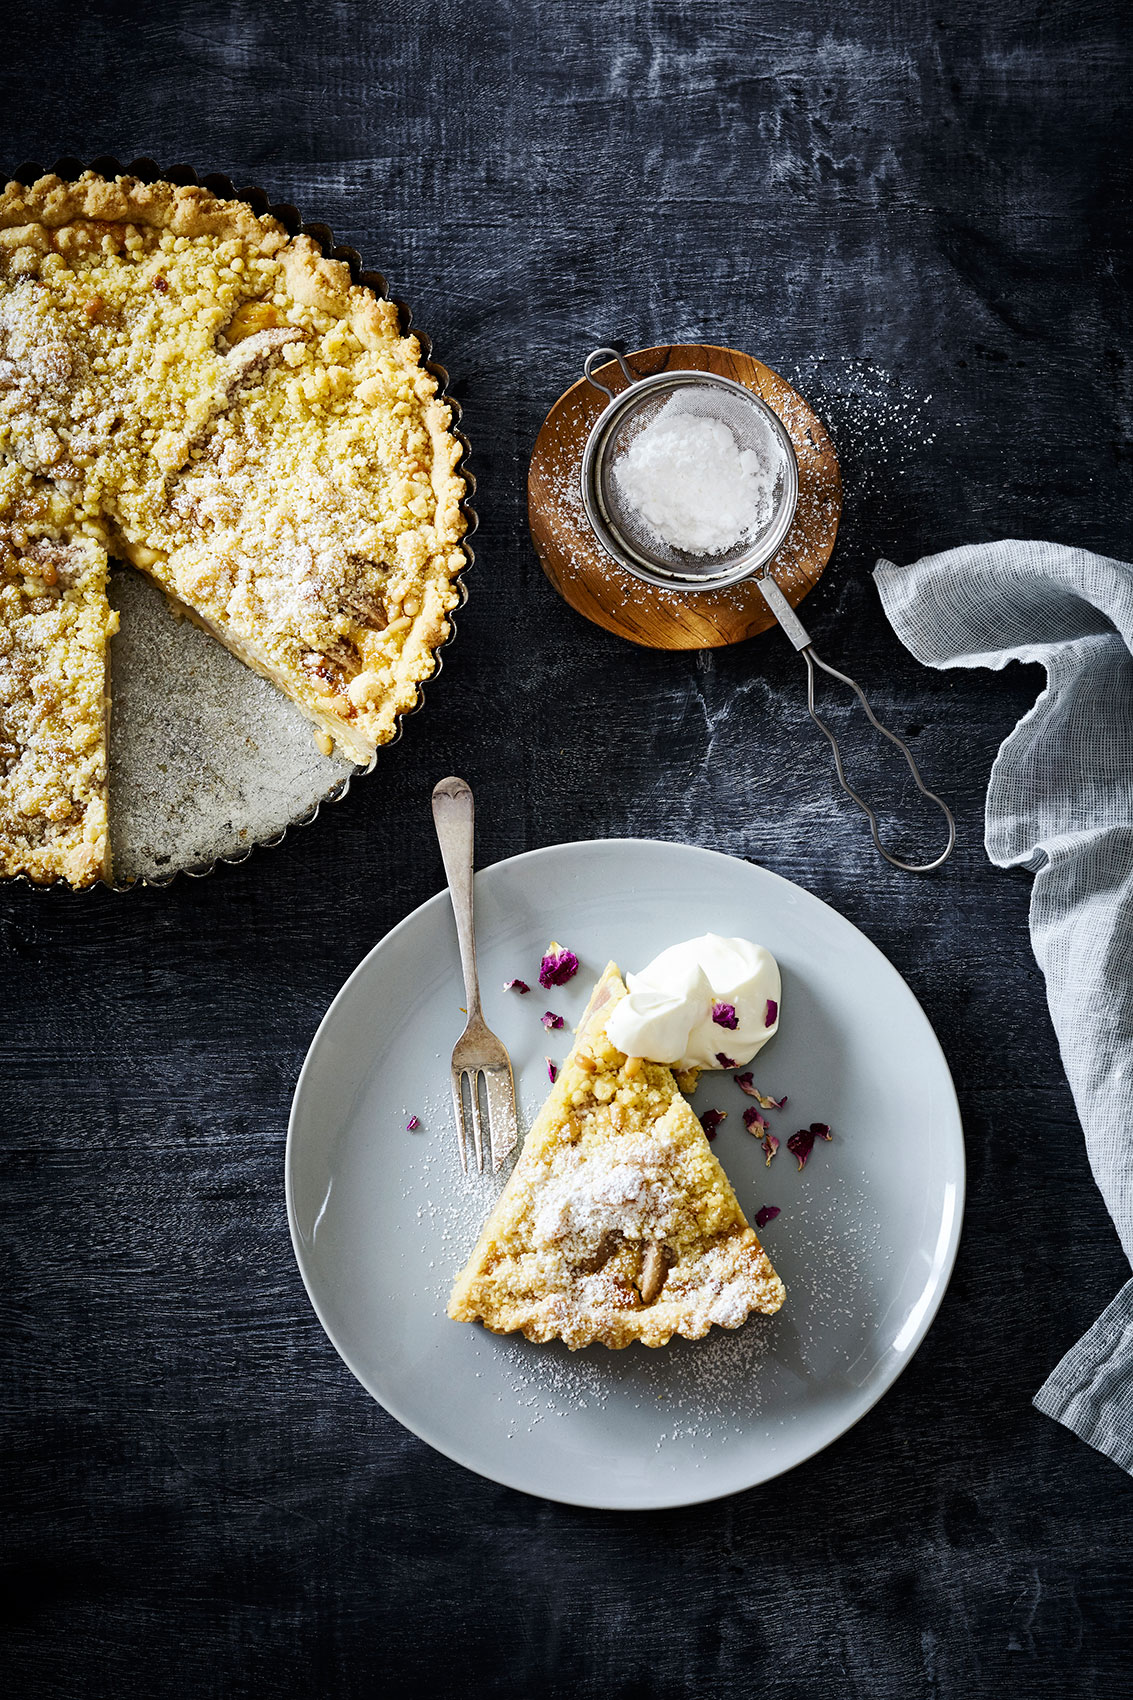 Slow Cooked • Passionfruit Crumble with Icing Sugar & Fresh Cream • Cookbook & Editorial Food Photography